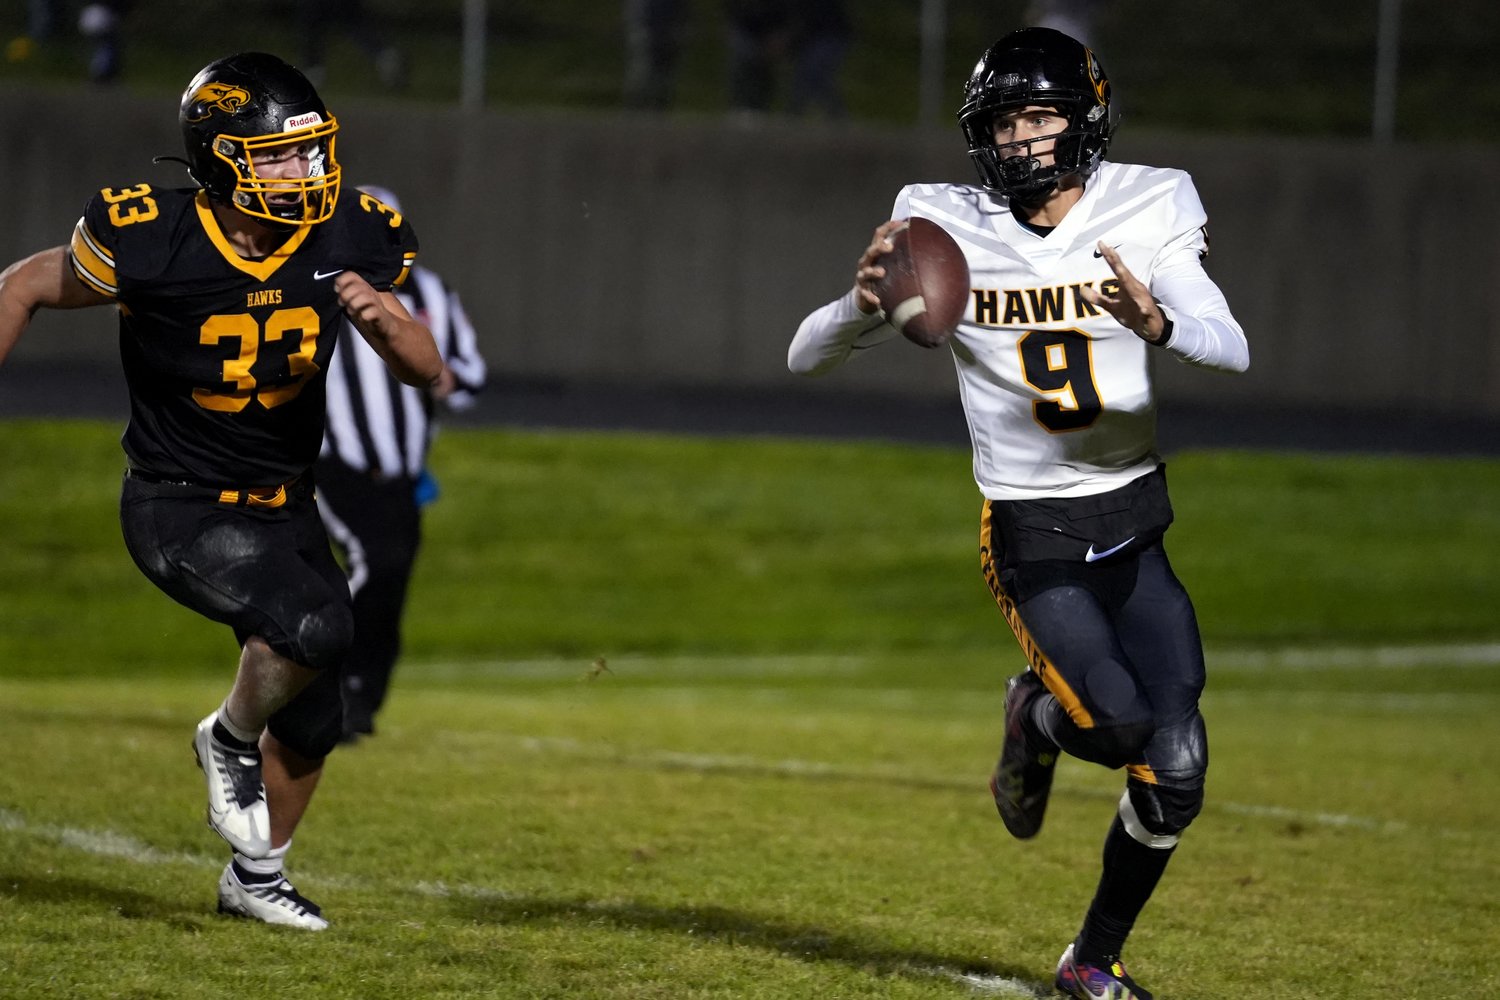 Central Lee High School quarterback Cory Jones (9) looks to pass the ball during their game against Mid-Prairie High School, Friday, September 23, 2022 at Mid-Prairie.